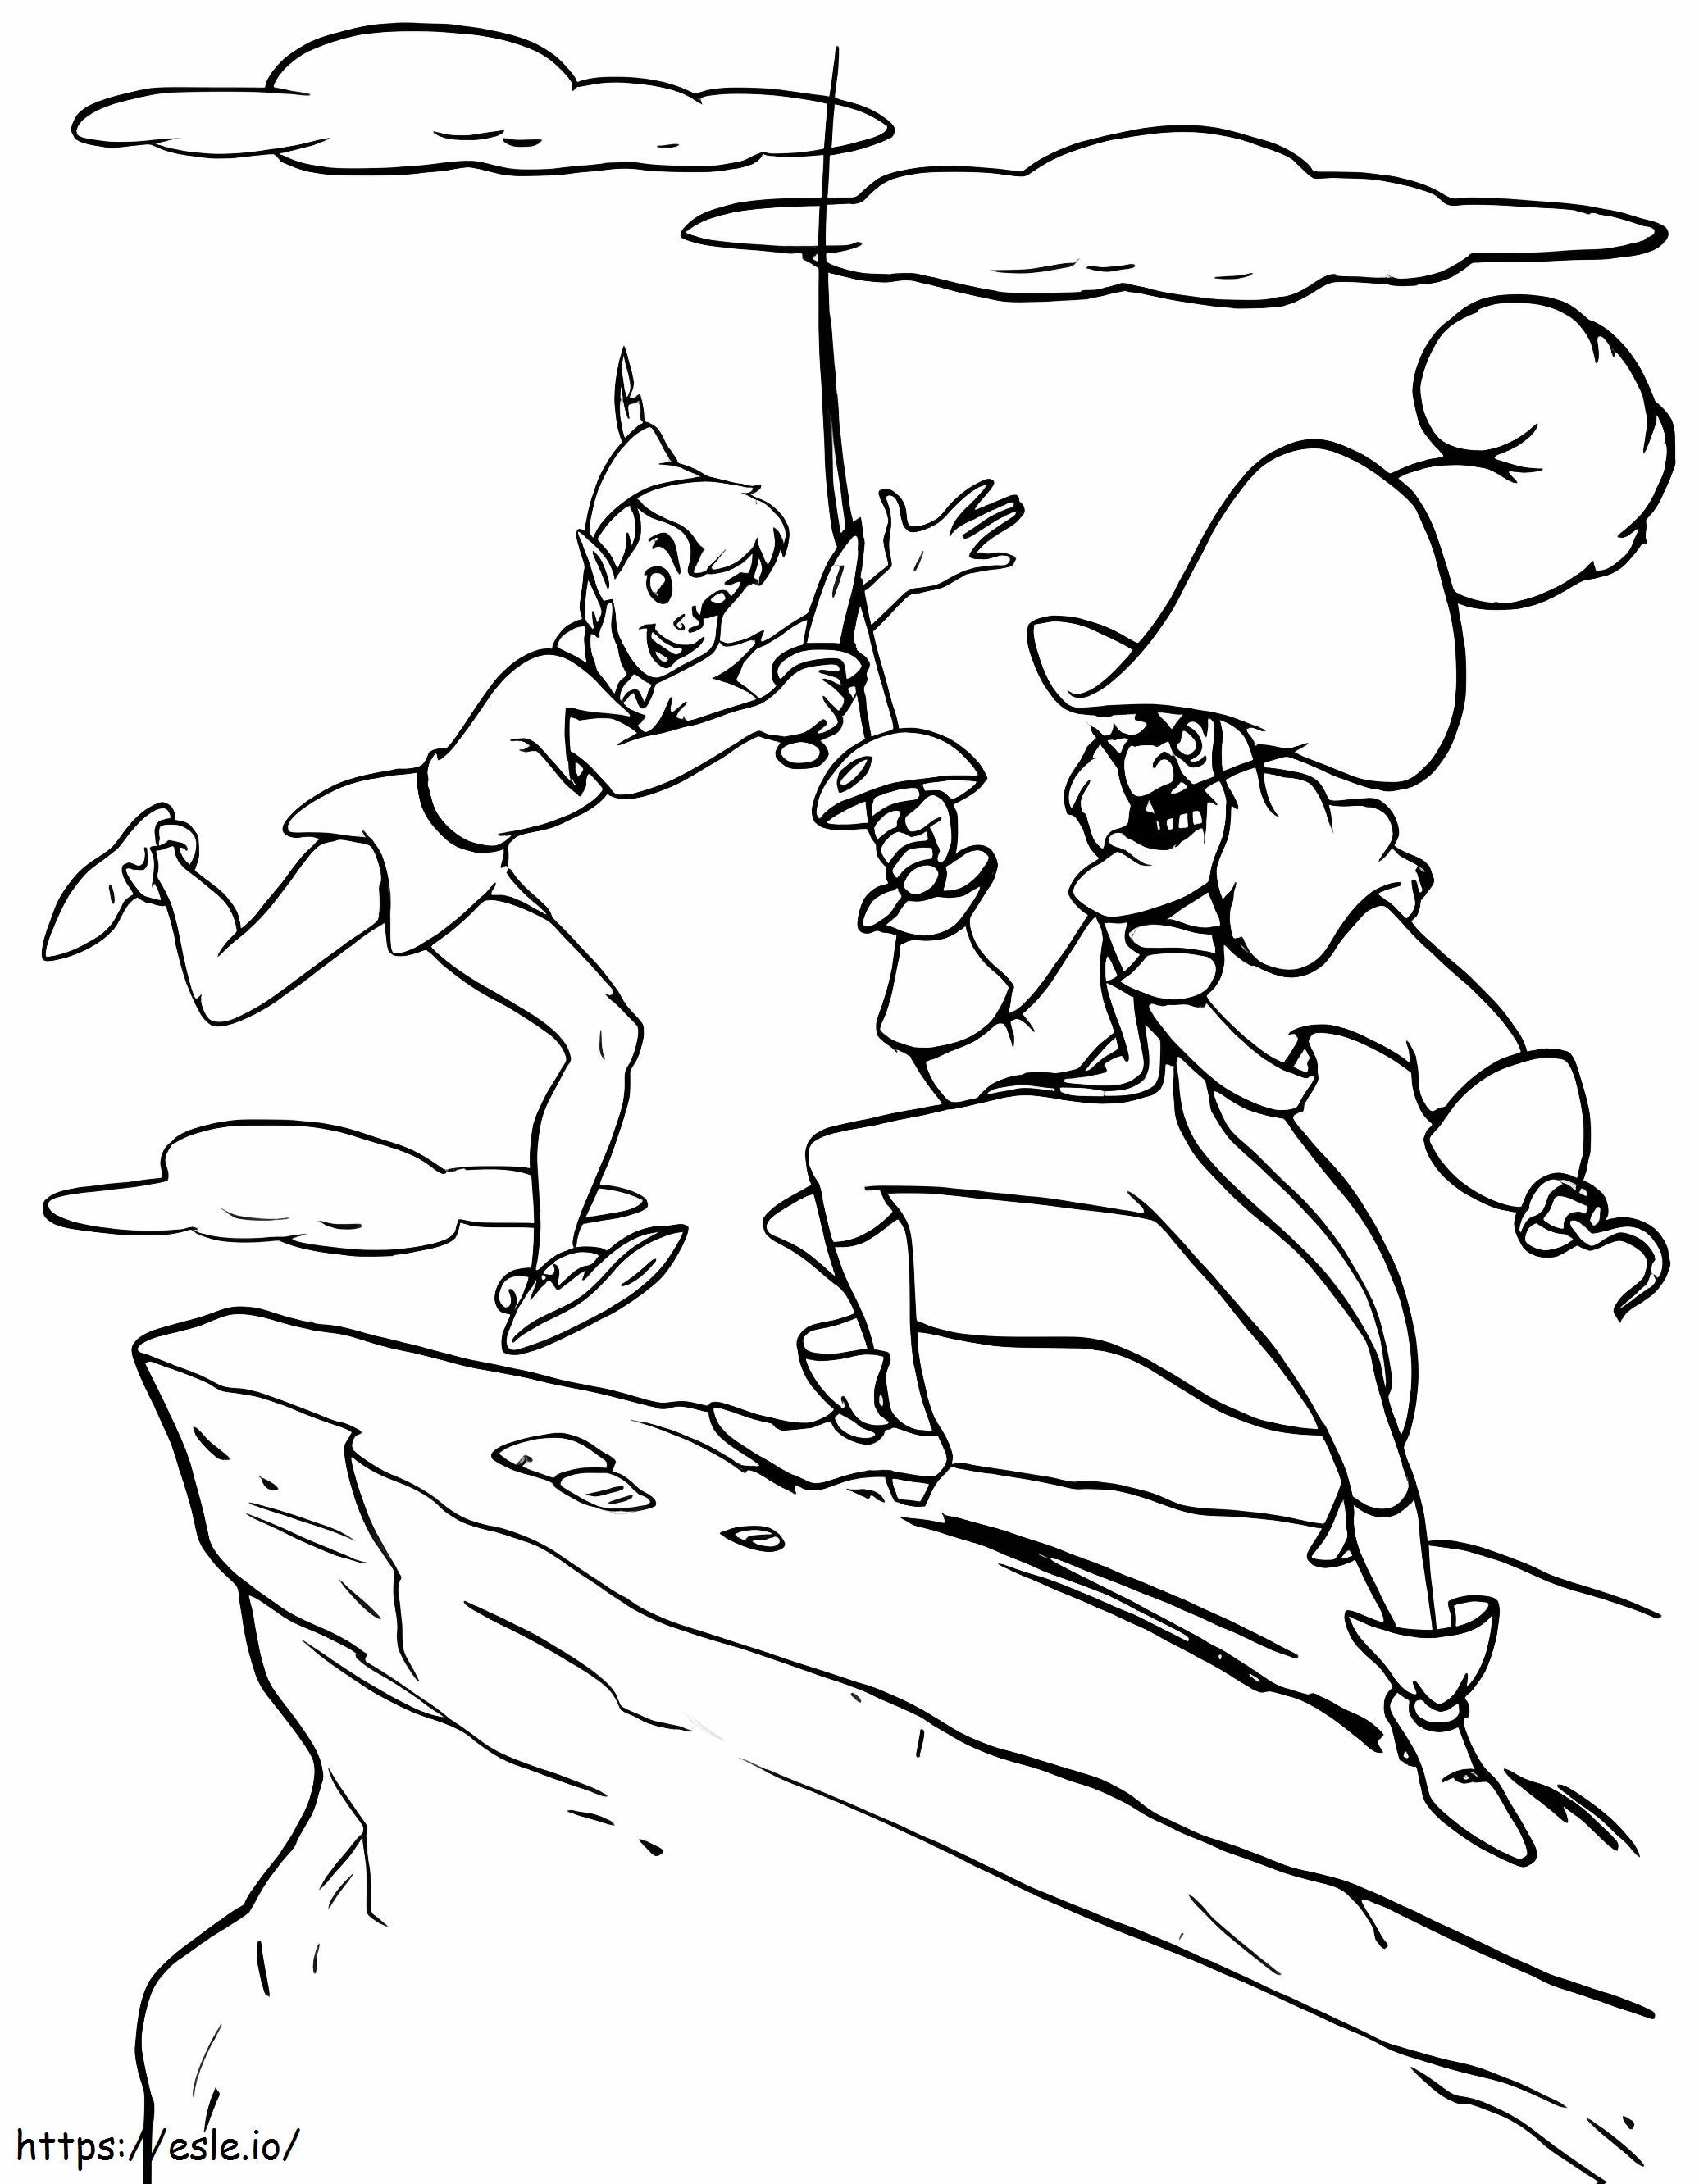 Peter Pan And Hook Fighting coloring page